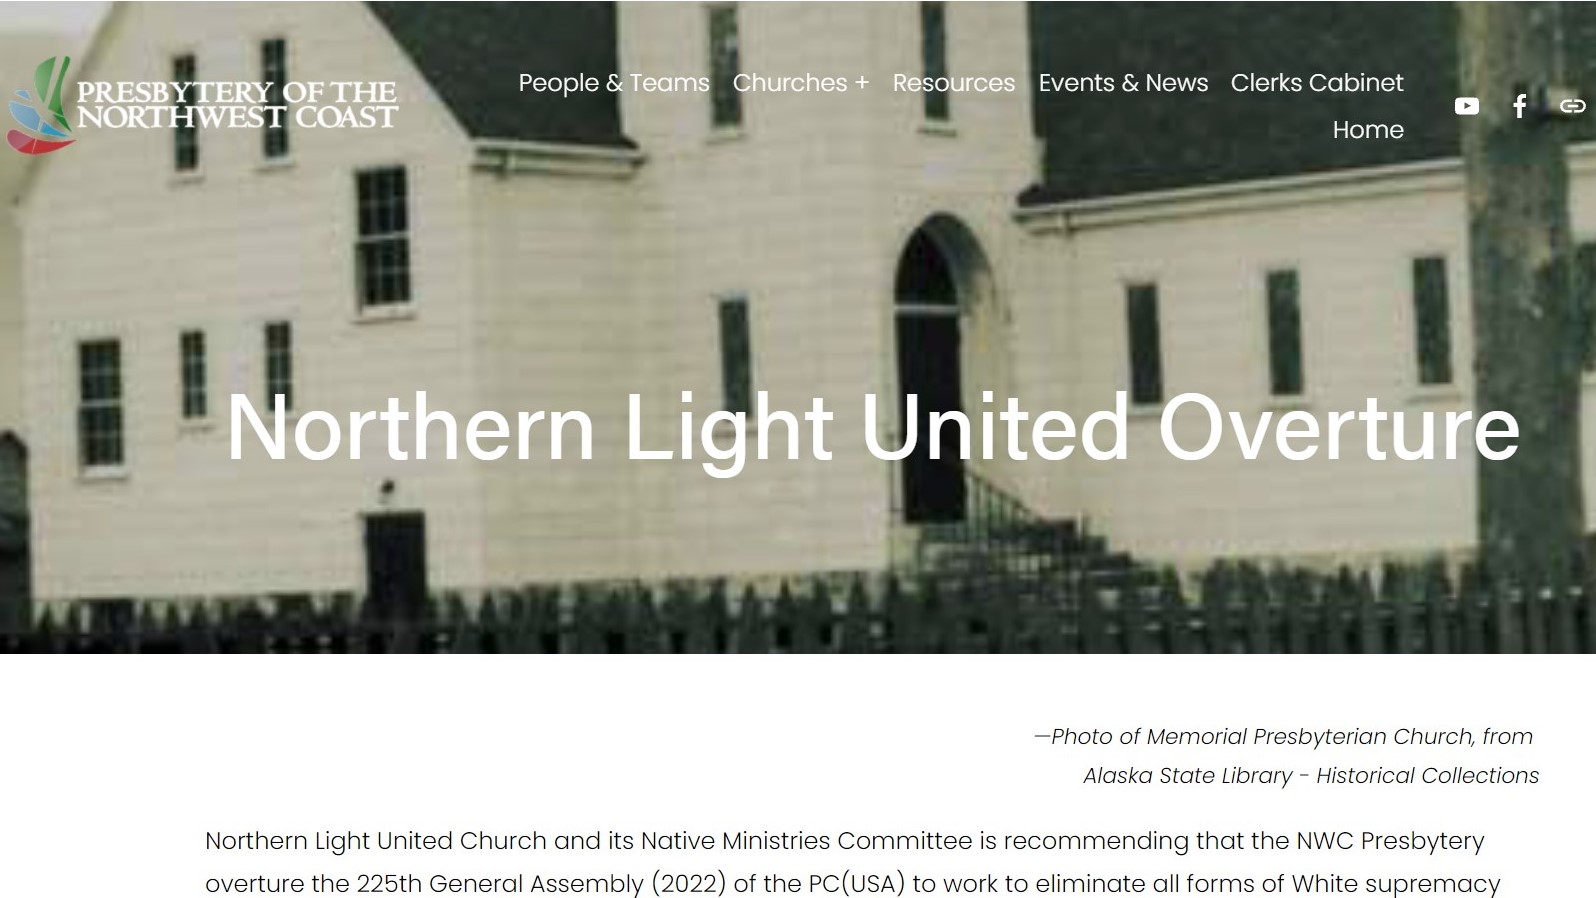 Image of webpage for the Northern Light United Overture from the Presbytery of the Northwest Coast website